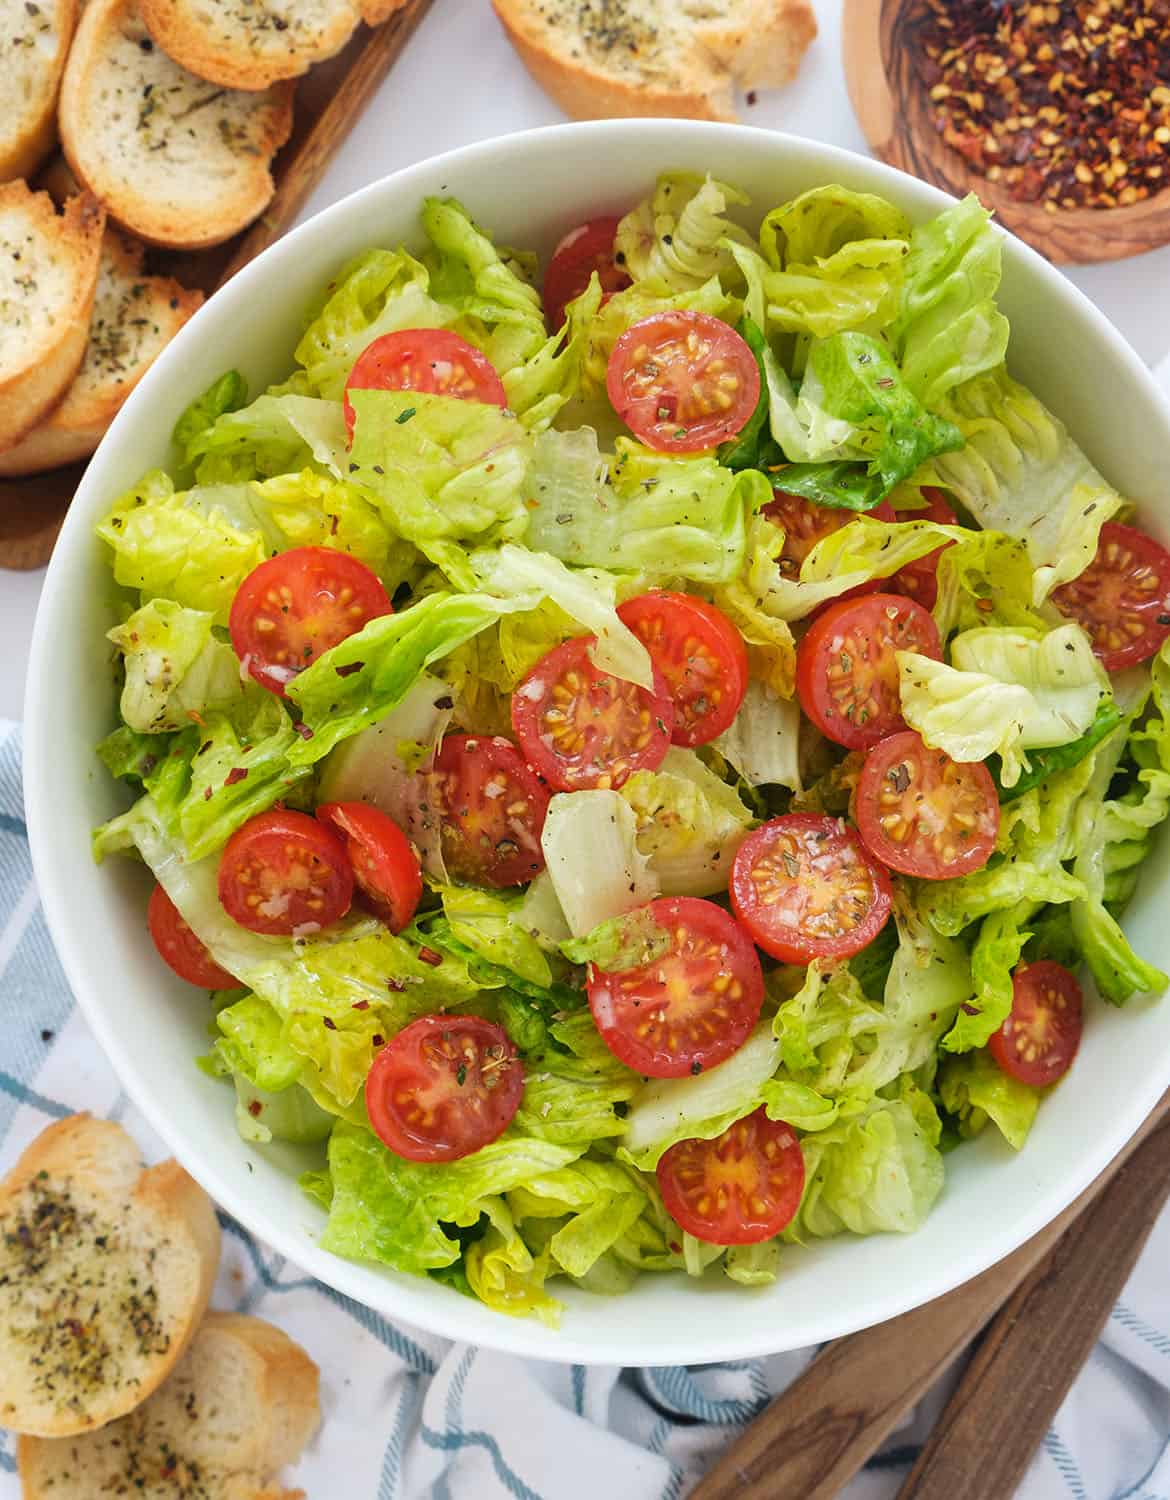 Every household needs a simple and reliable salad & lettuce